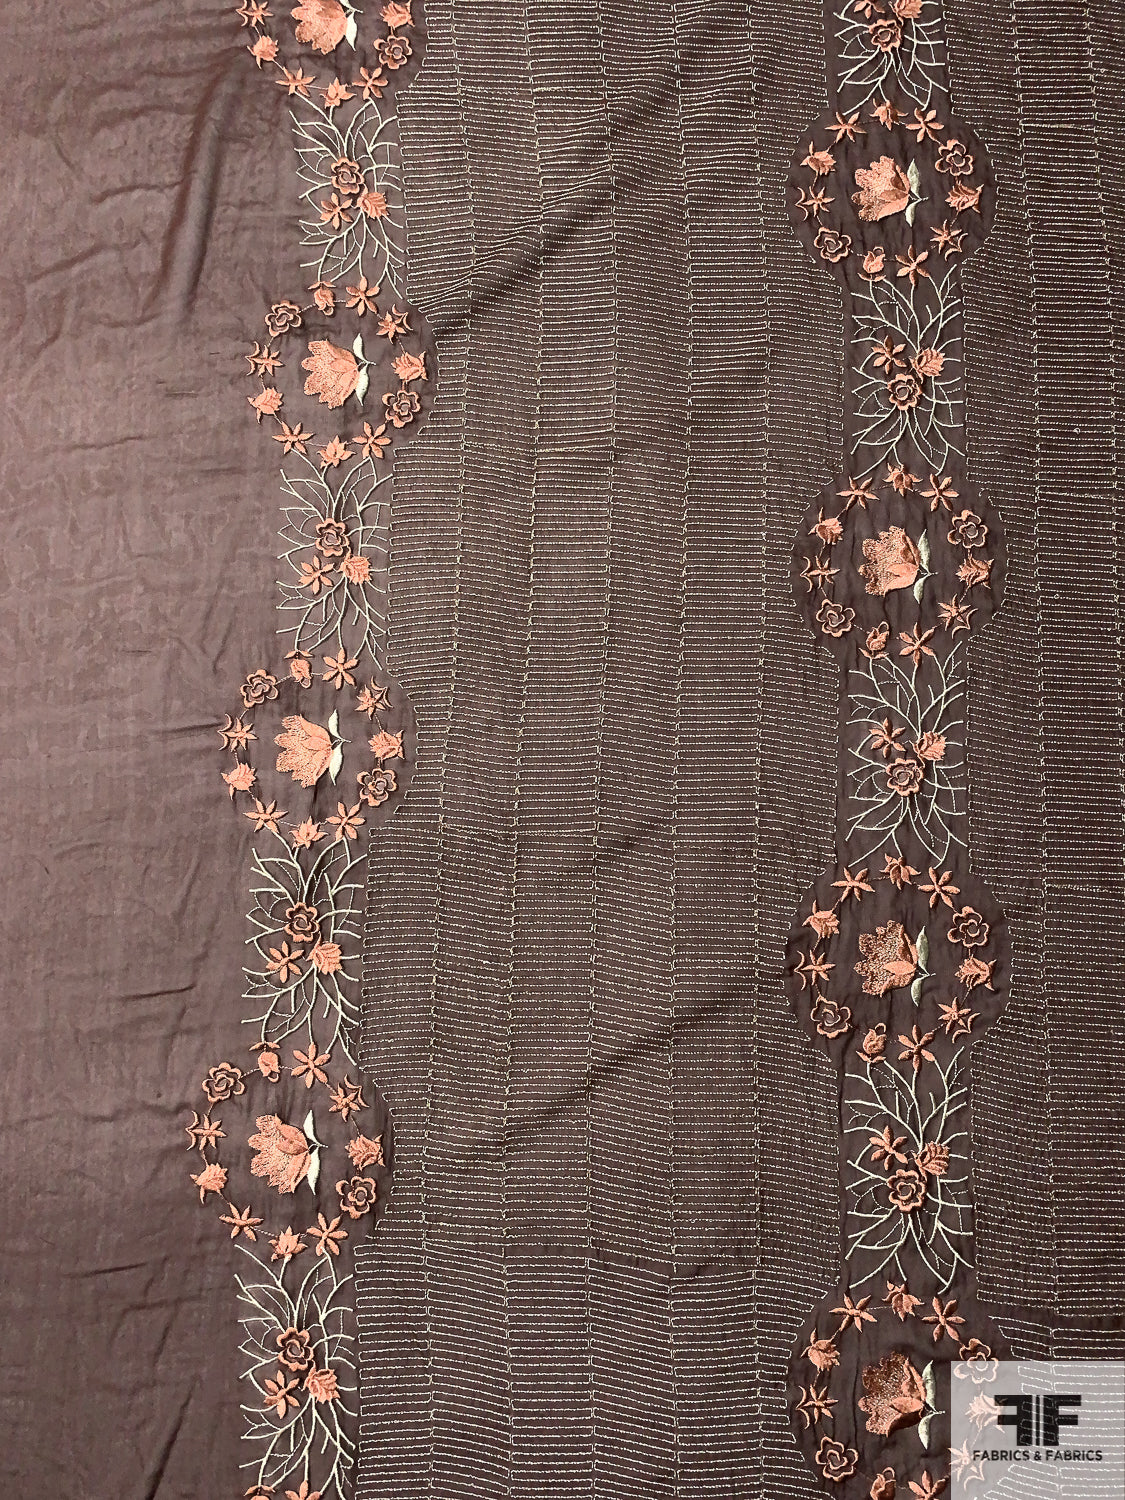 Floral Wreath and Rows Embroidered Silk Chiffon with Lurex Detailing and Scalloped Edge - Brown / Cider Brown / Silver / Sage